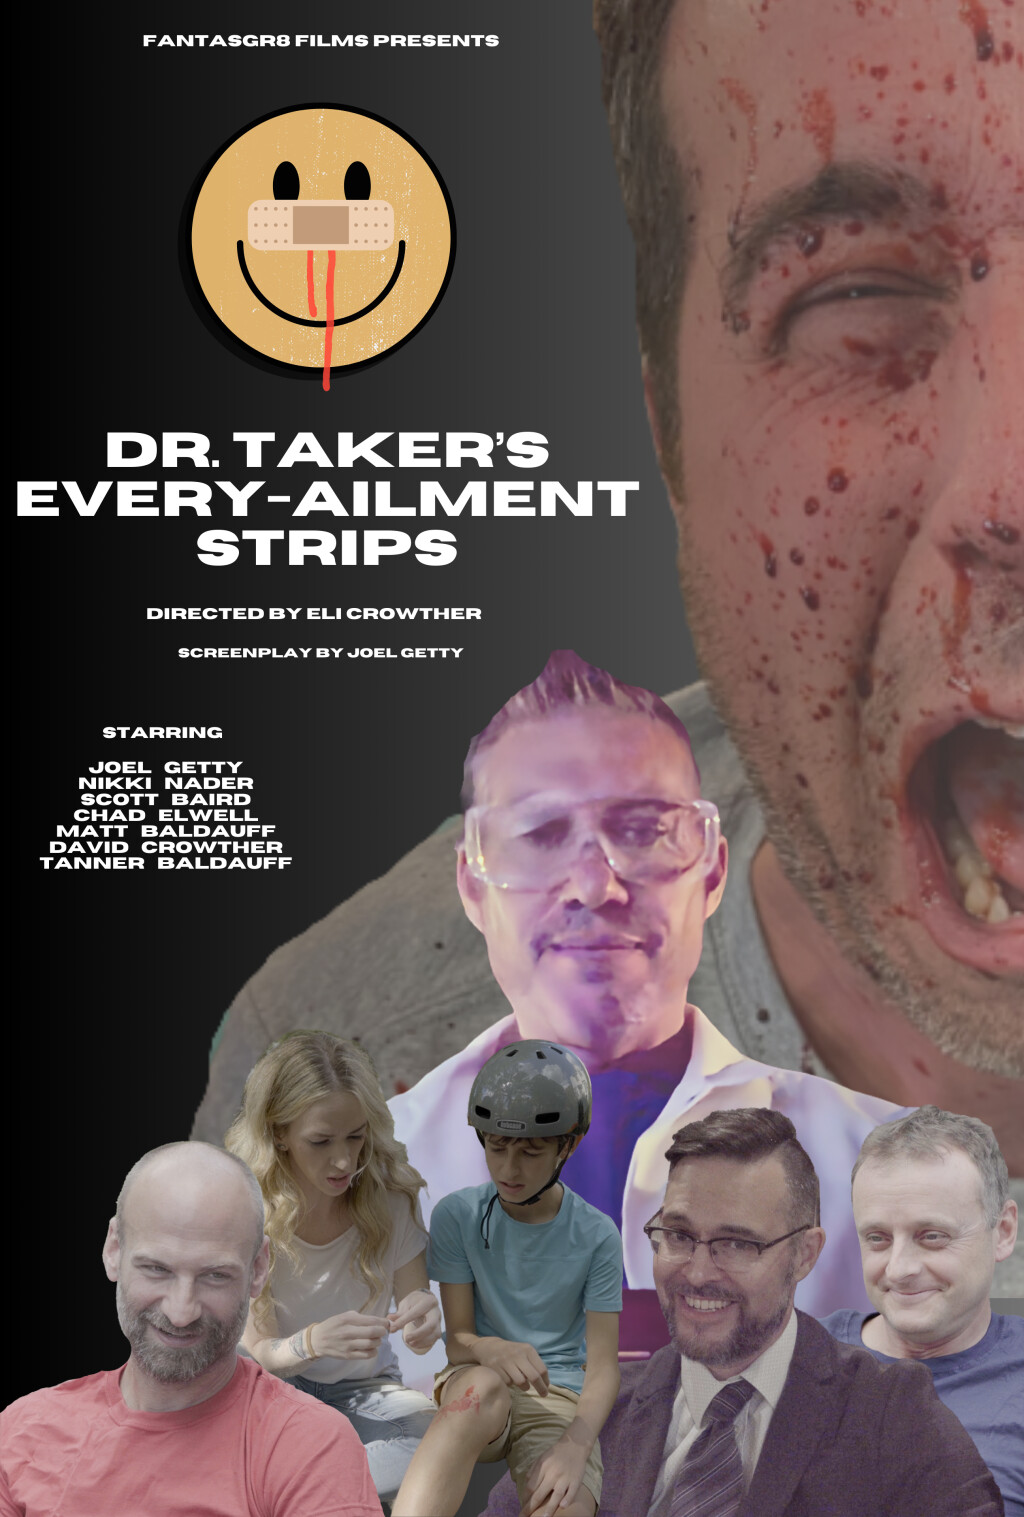 Filmposter for Dr. Taker's Every-Ailment Strips